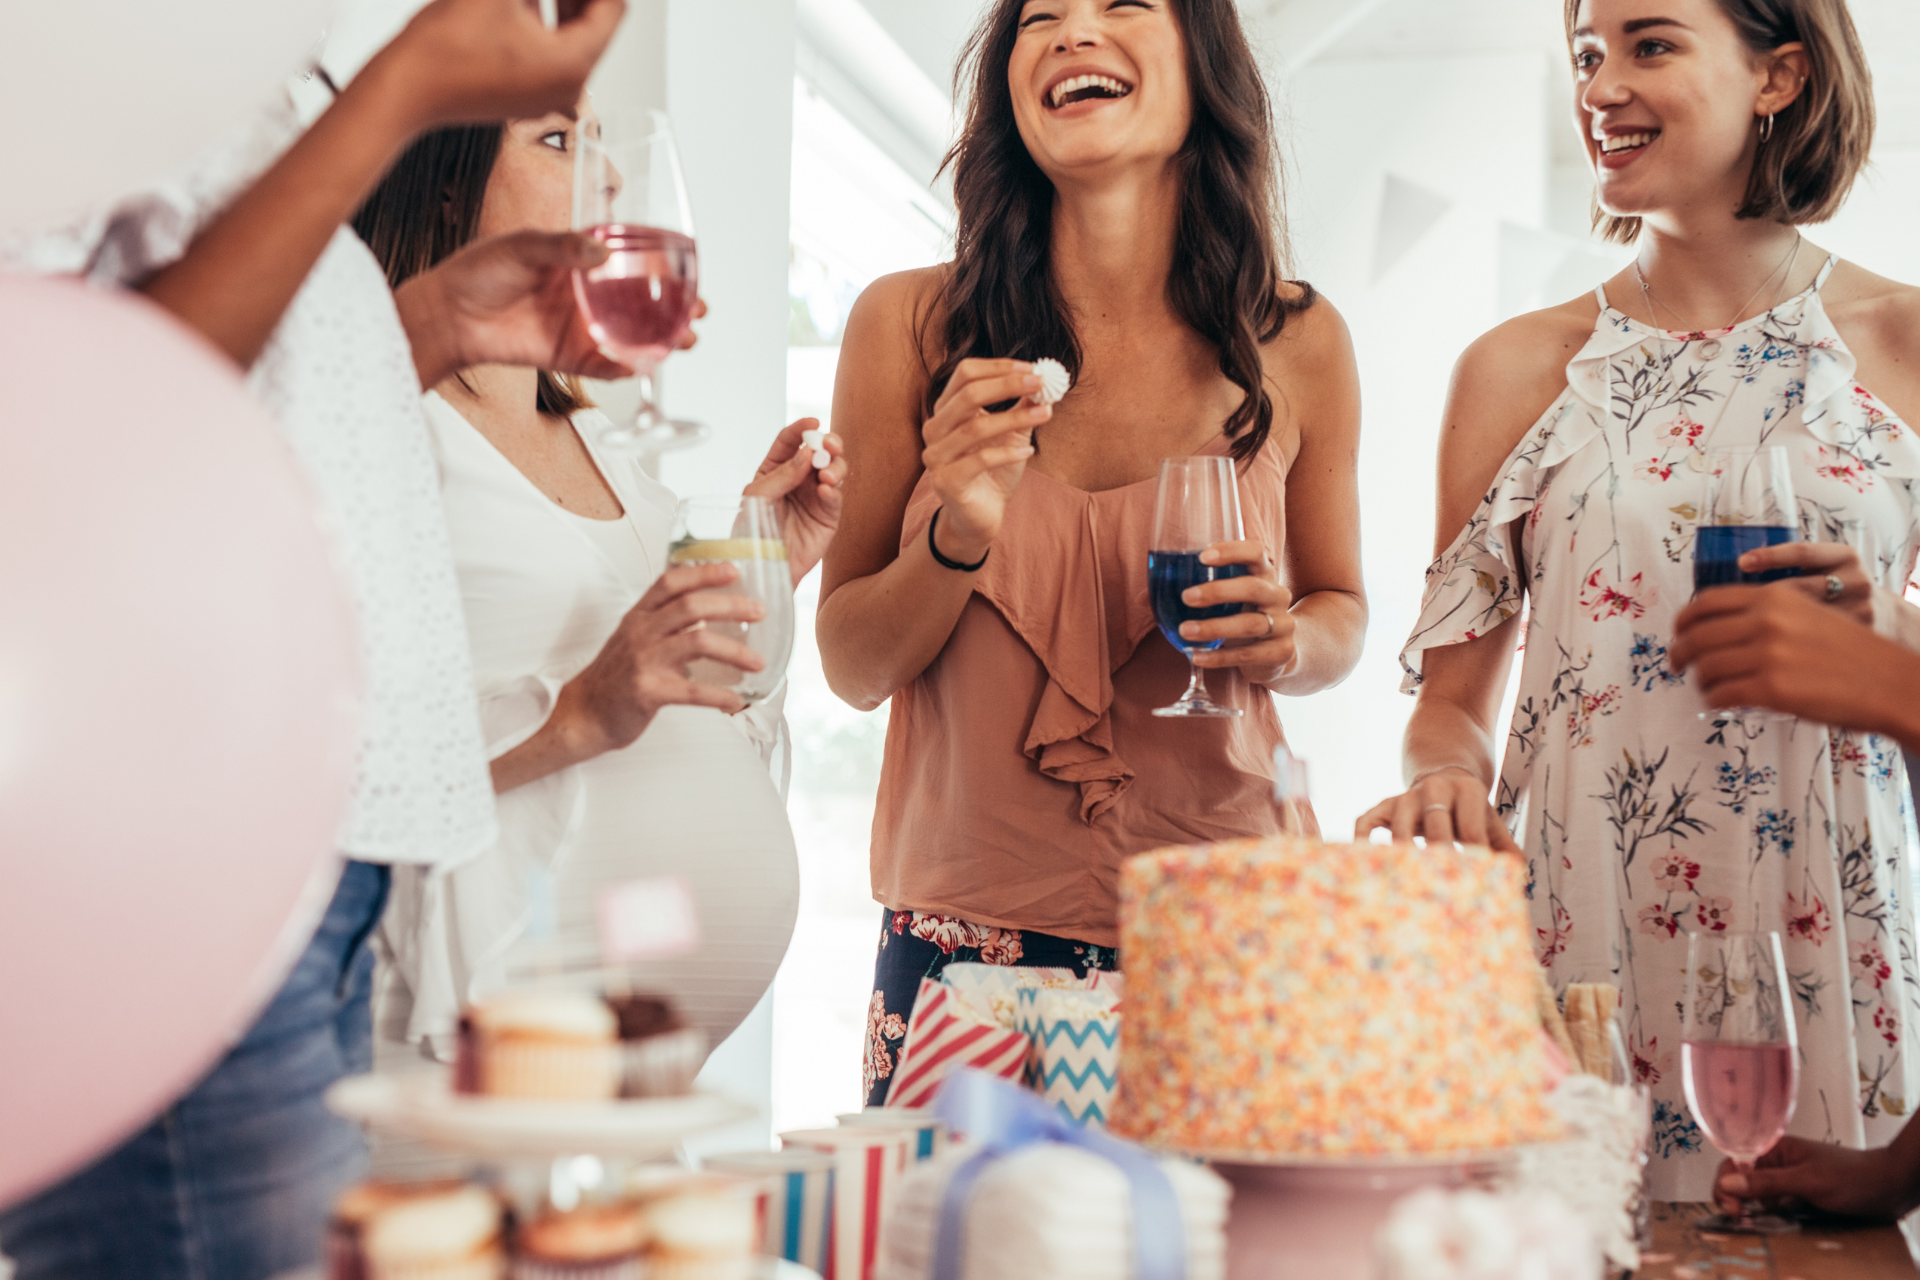 5 Perfect Occasions For Alcohol-Free Drinks